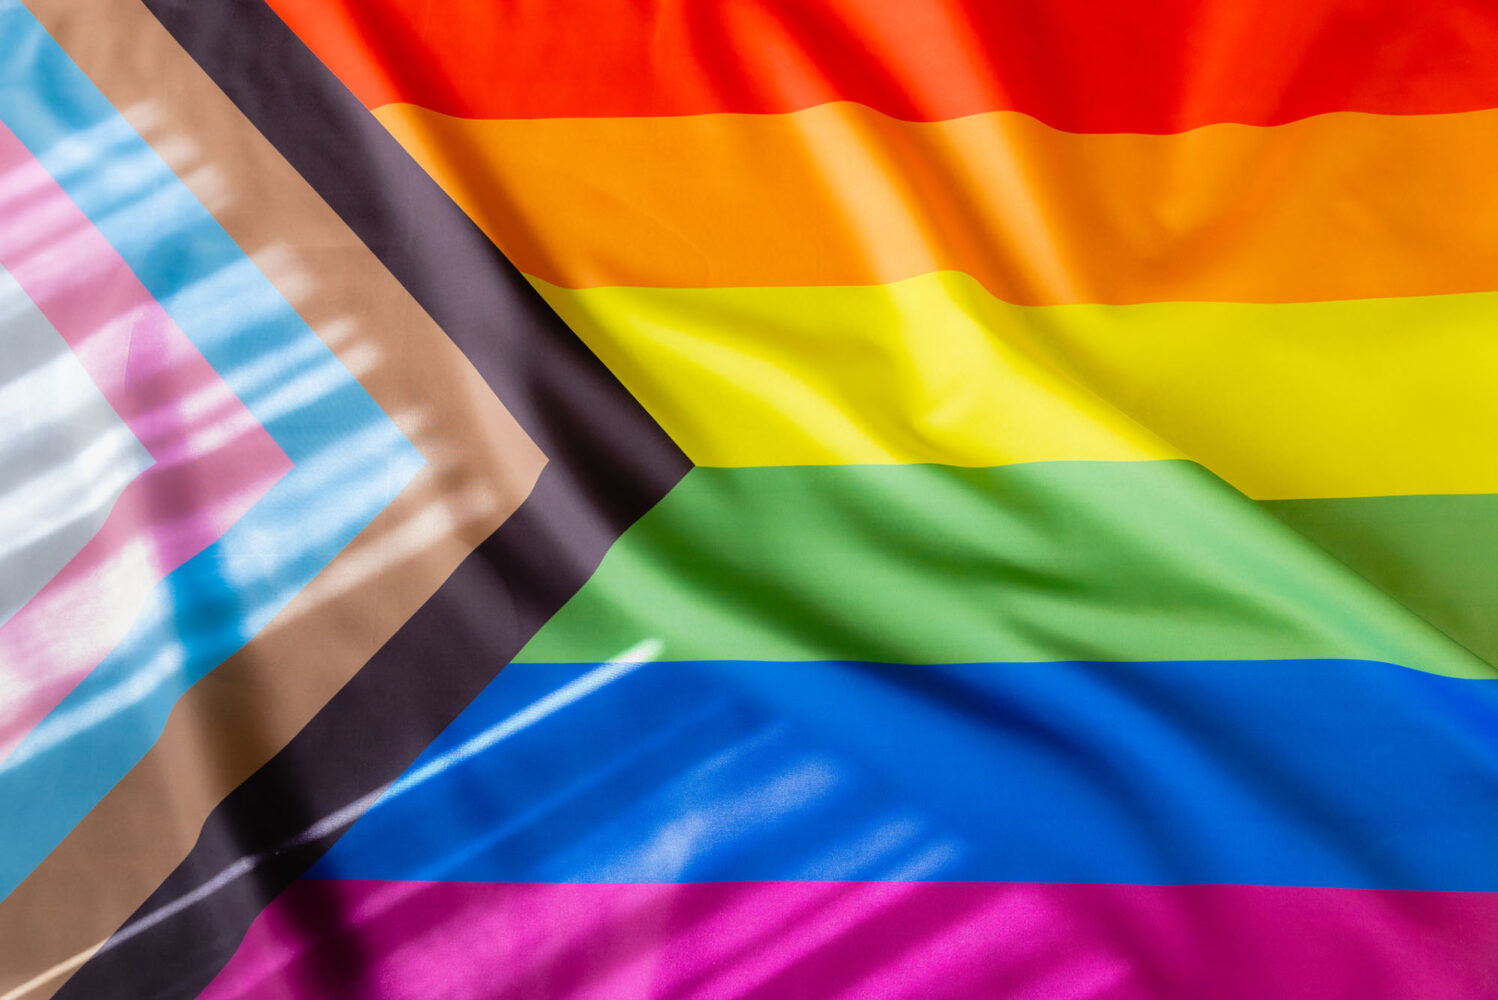 Photo: A picture of a pride flag with many vibrant colors